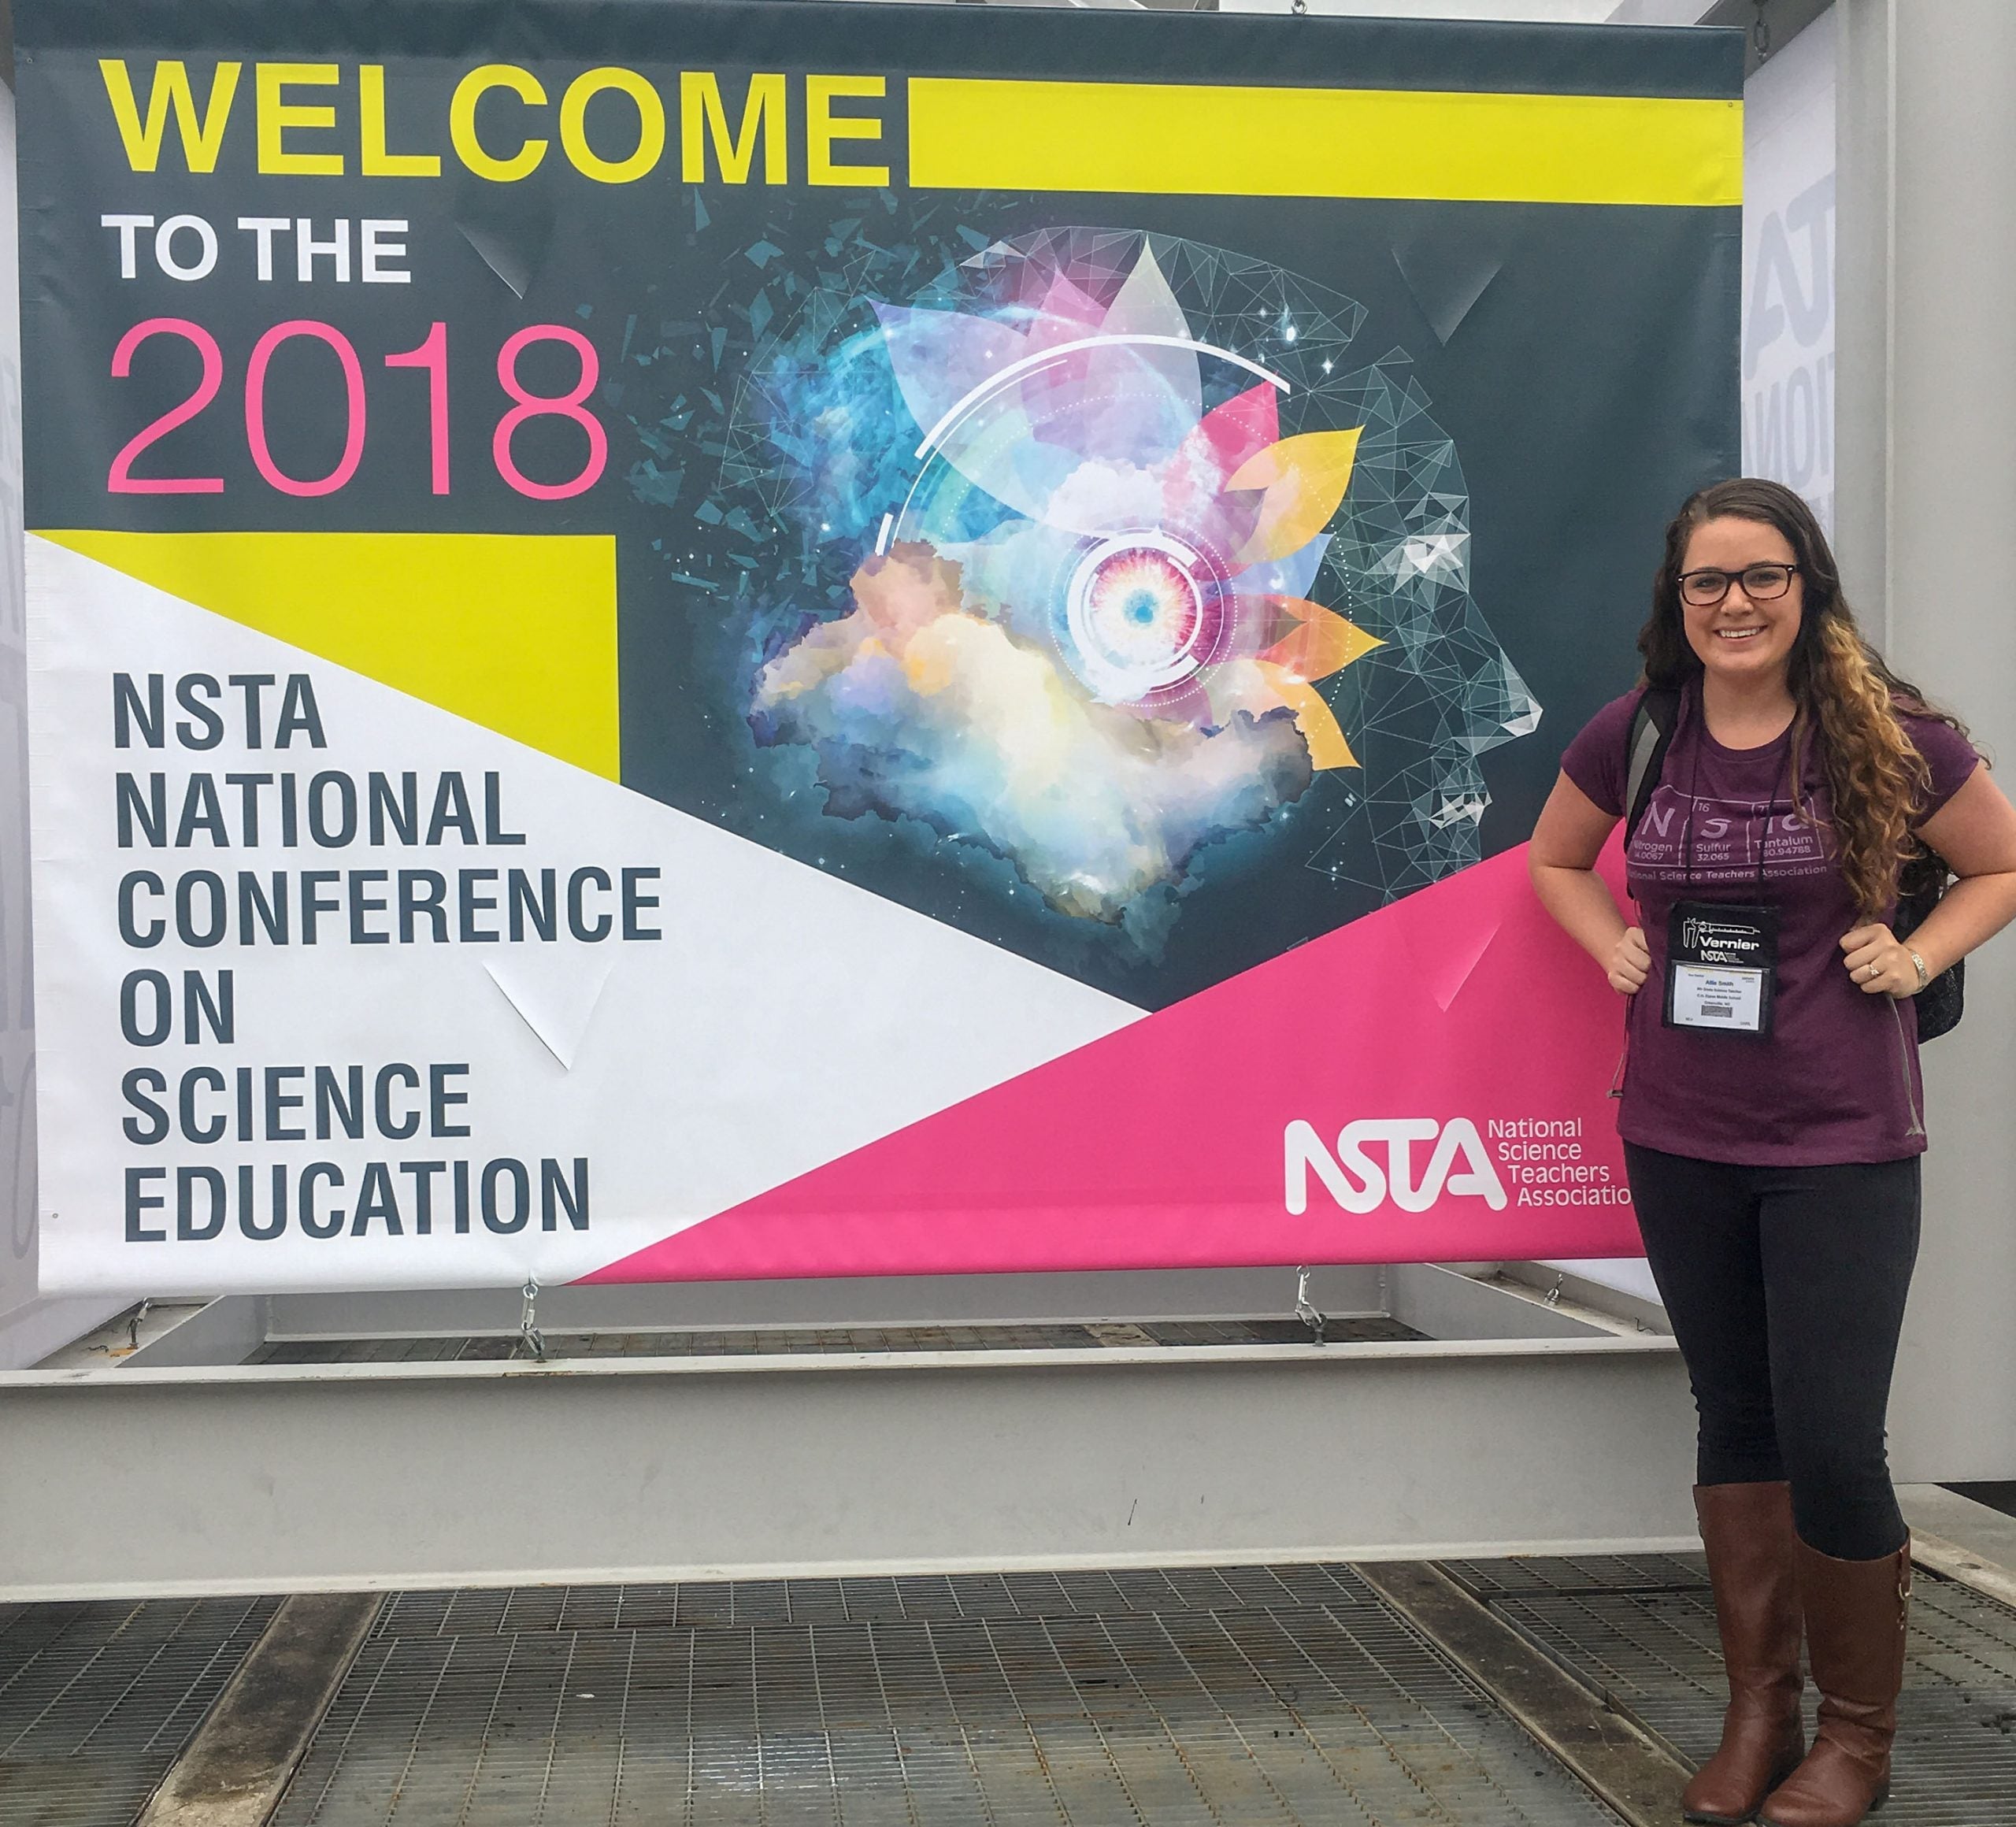 John C. Park Scholarship recipient Allie Smith at the 2018 NSTA National Conference on Science Education in Atlanta, Georgia.  